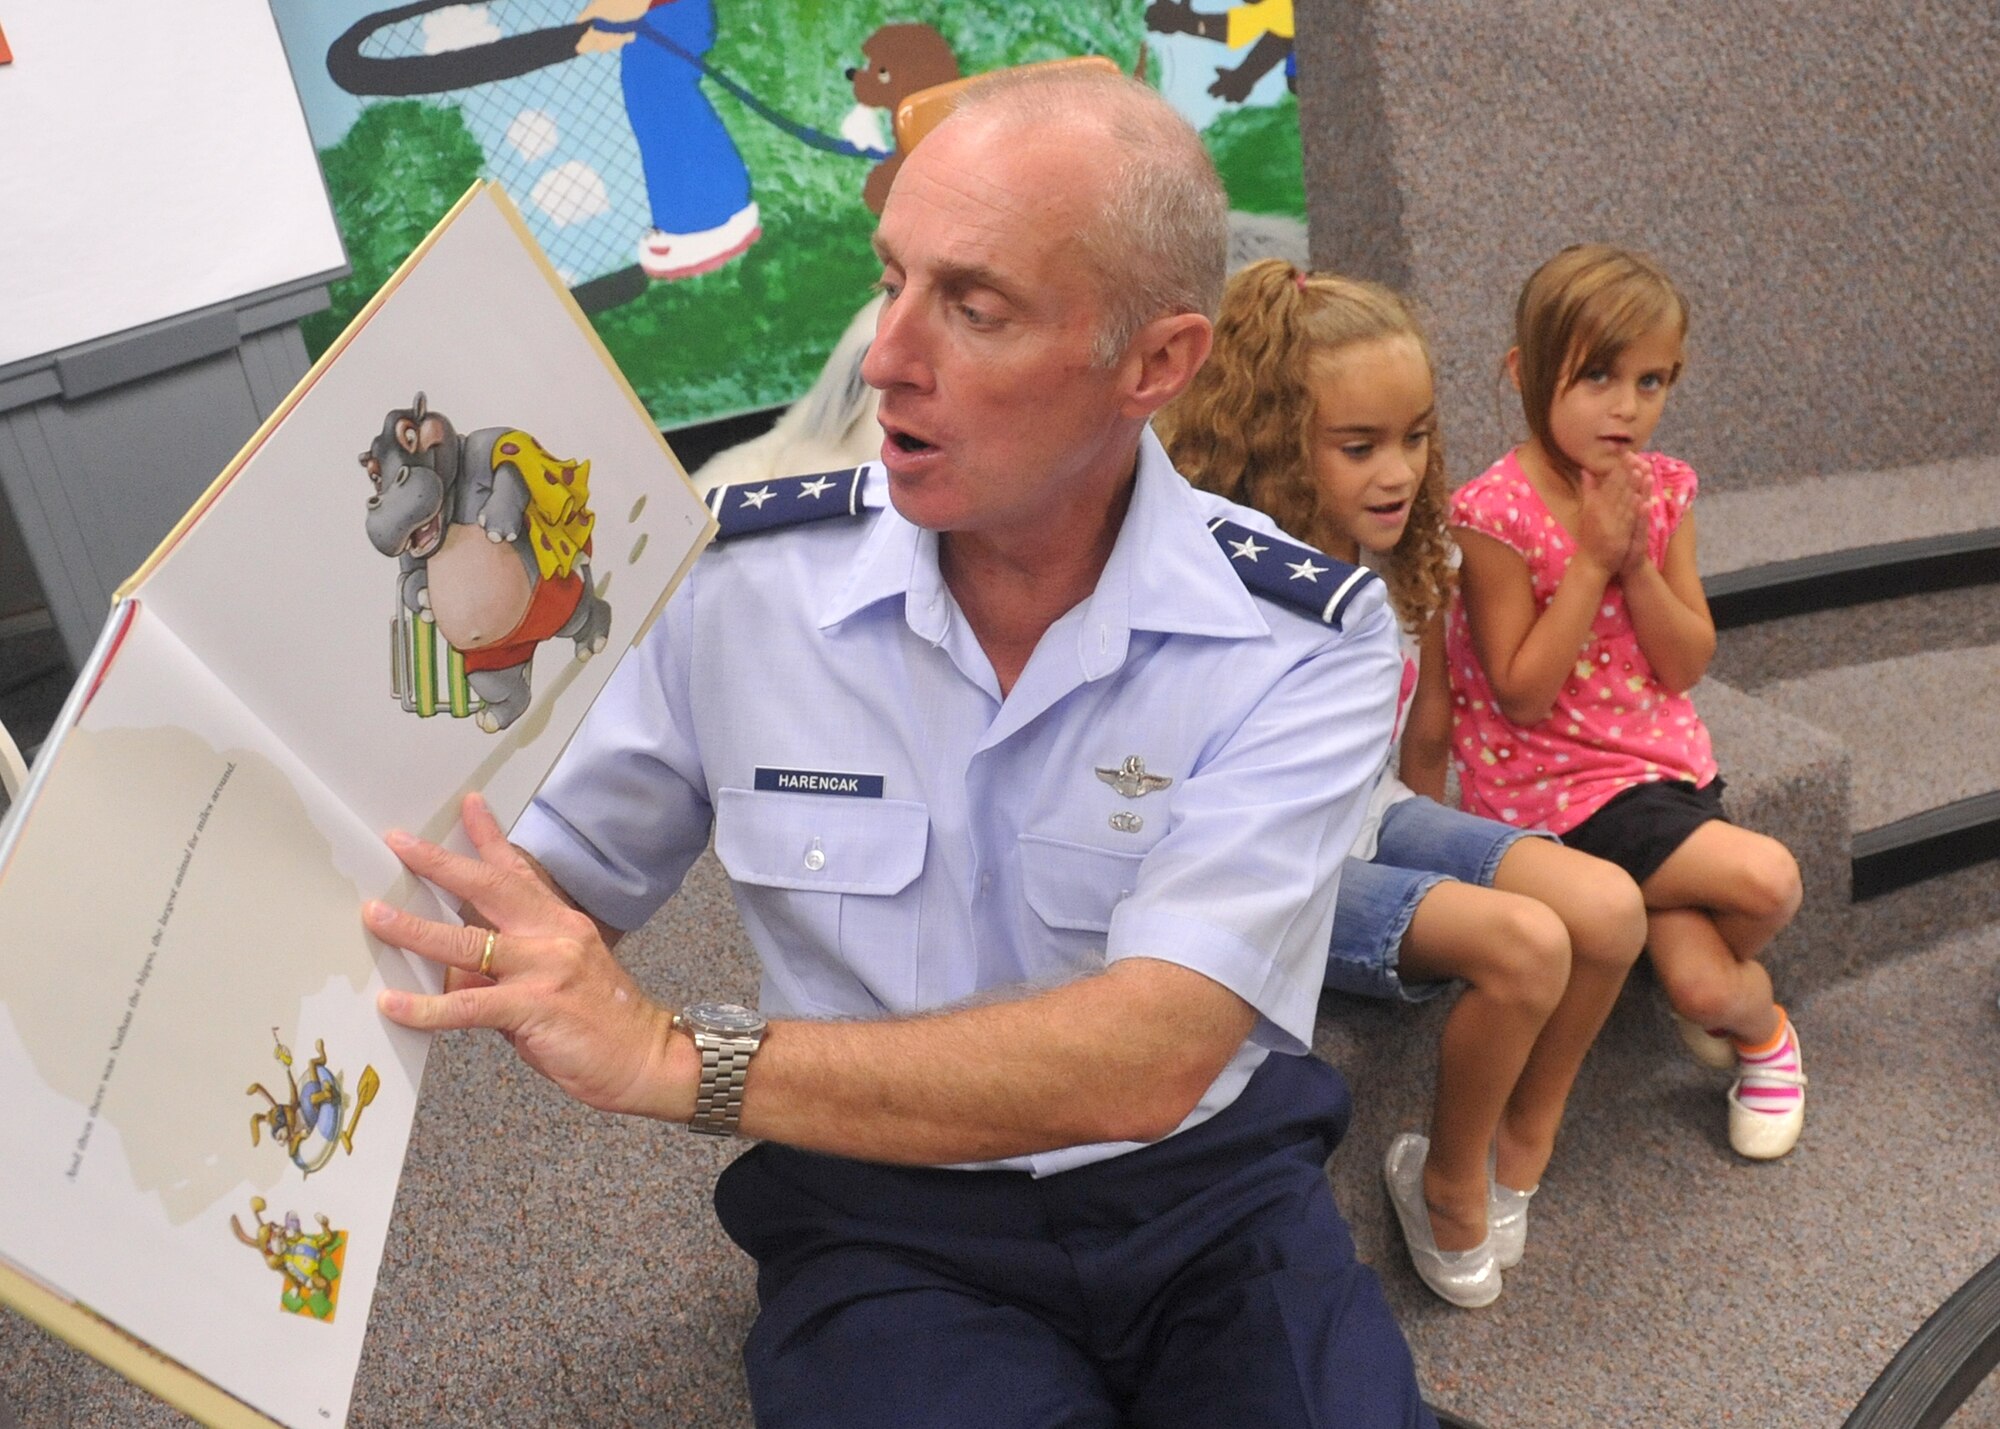 KIRTLAND AFB, N.M. -- Maj. Gen. Garrett Harencak, Air Force Nuclear Weapons Center commander, reads to first-graders Aug. 20 at Sandia Base Elementary School. (Photo by Todd Berenger)